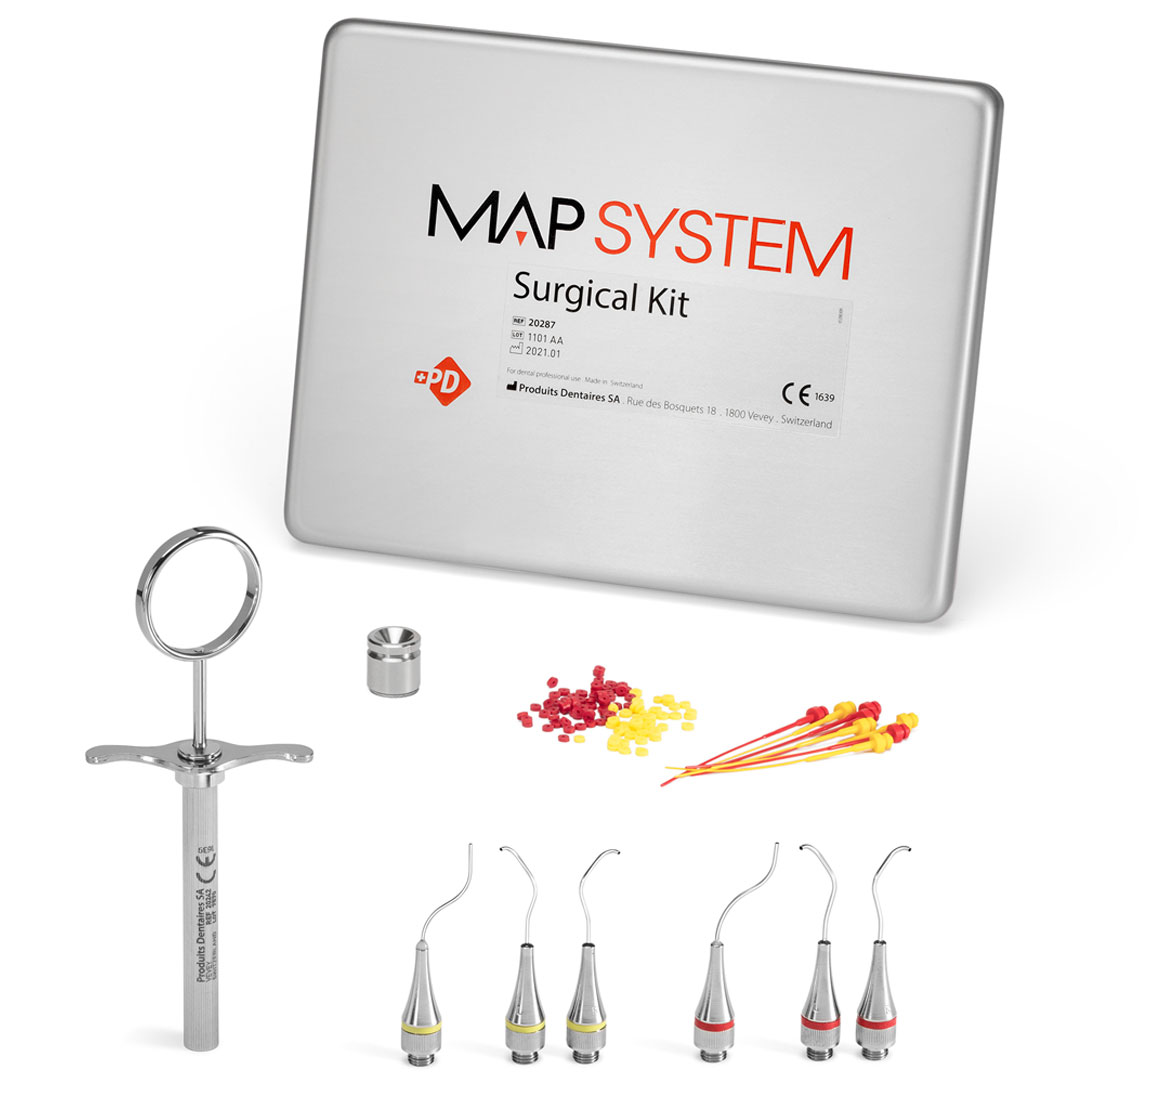 Buy MAP System Surgical kit products